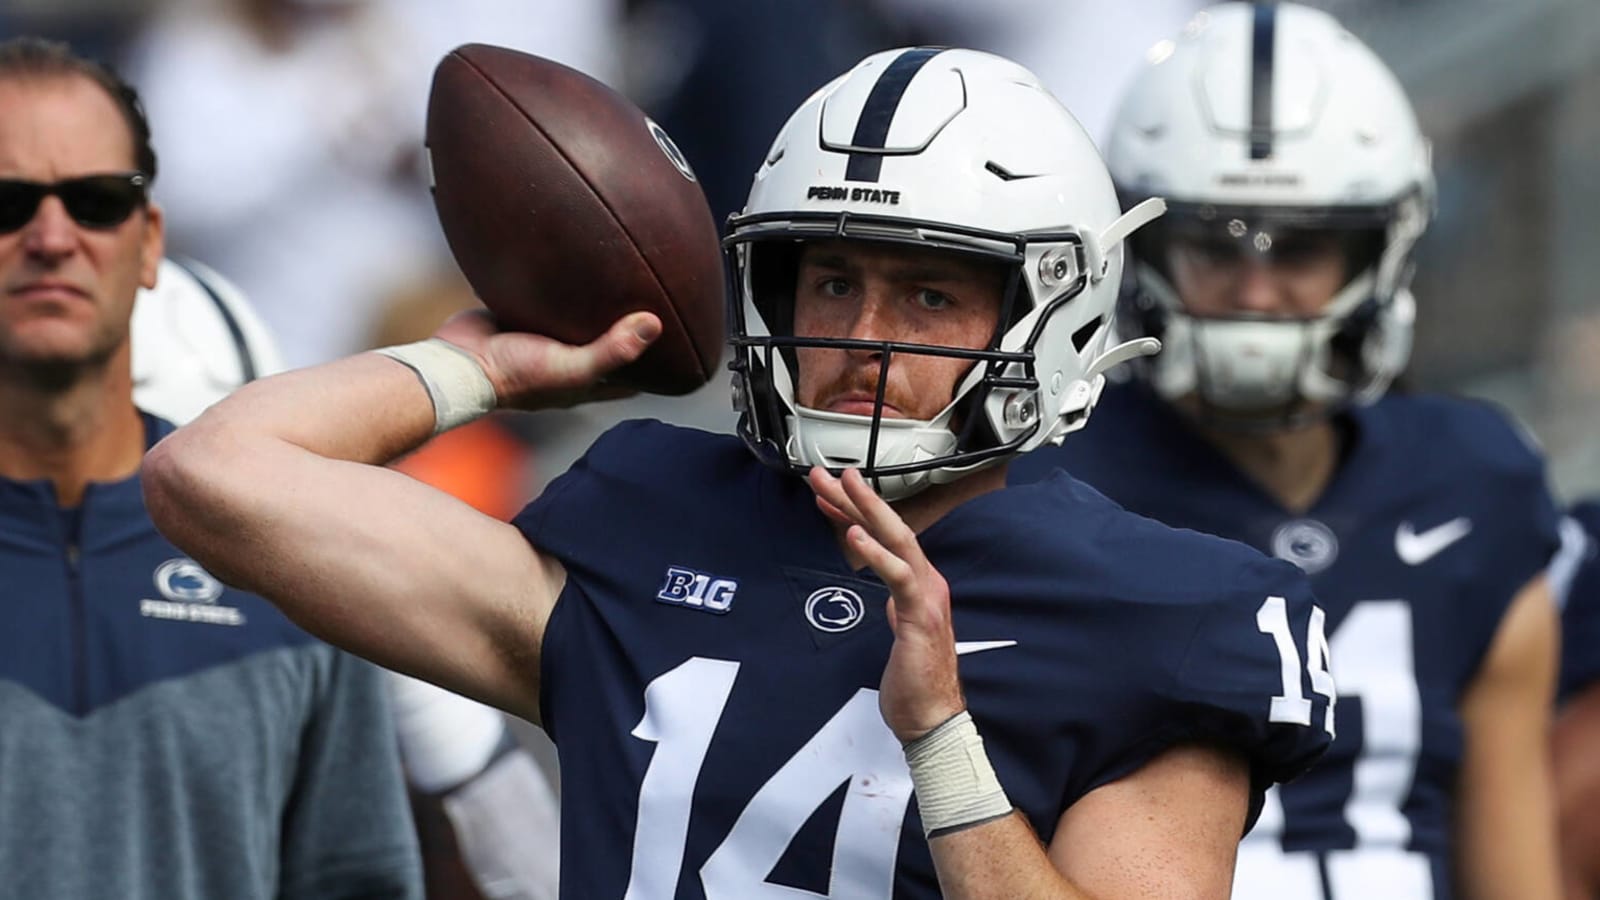 Did Penn State choose the wrong quarterback in 2020?